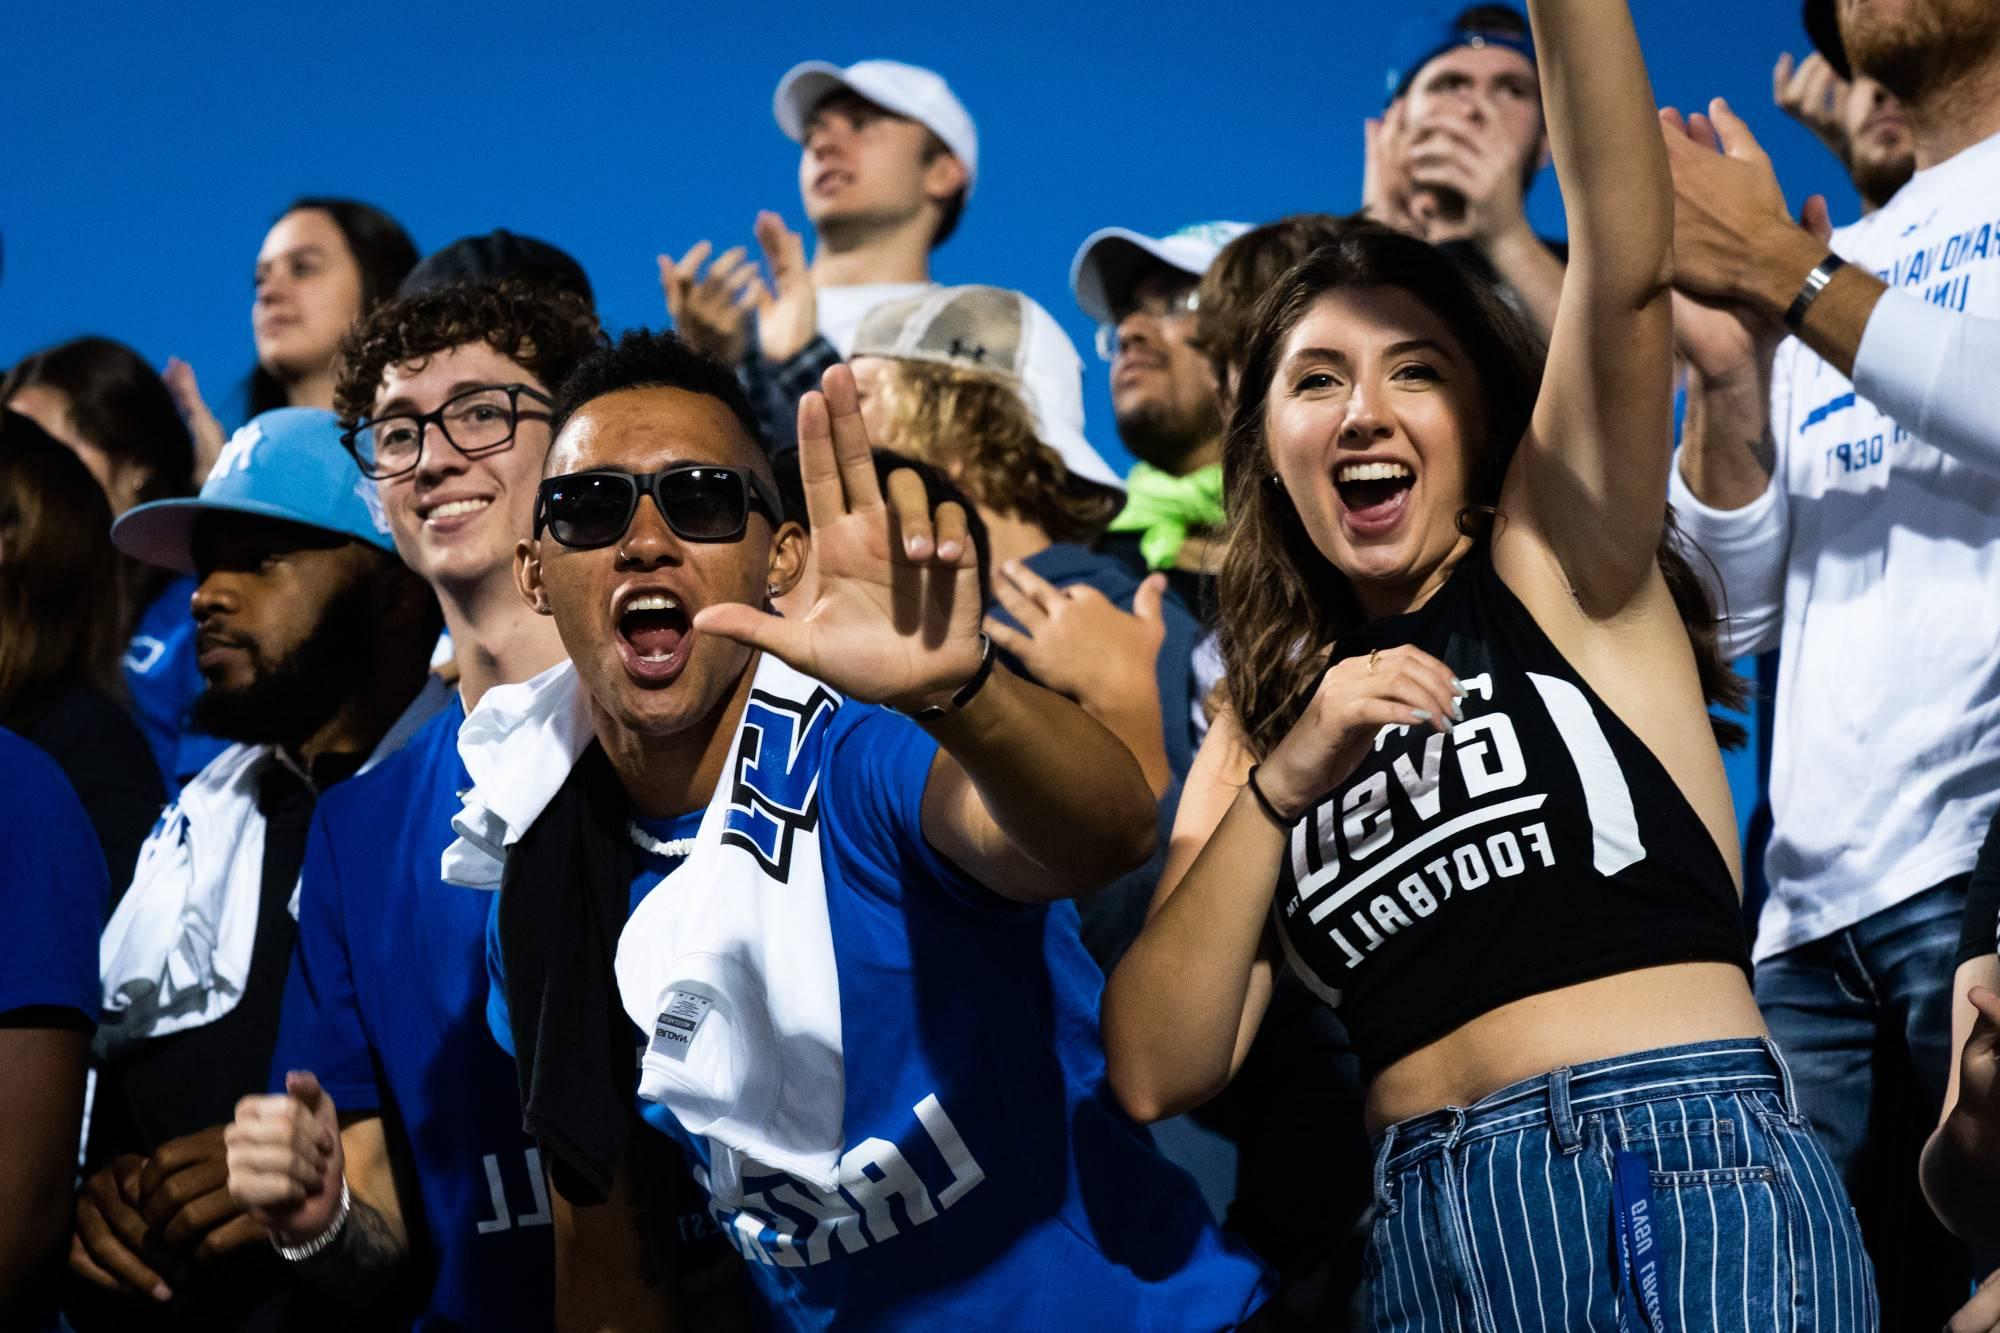 Students cheer on the GVSU football team from the stands in Lubbers Stadium